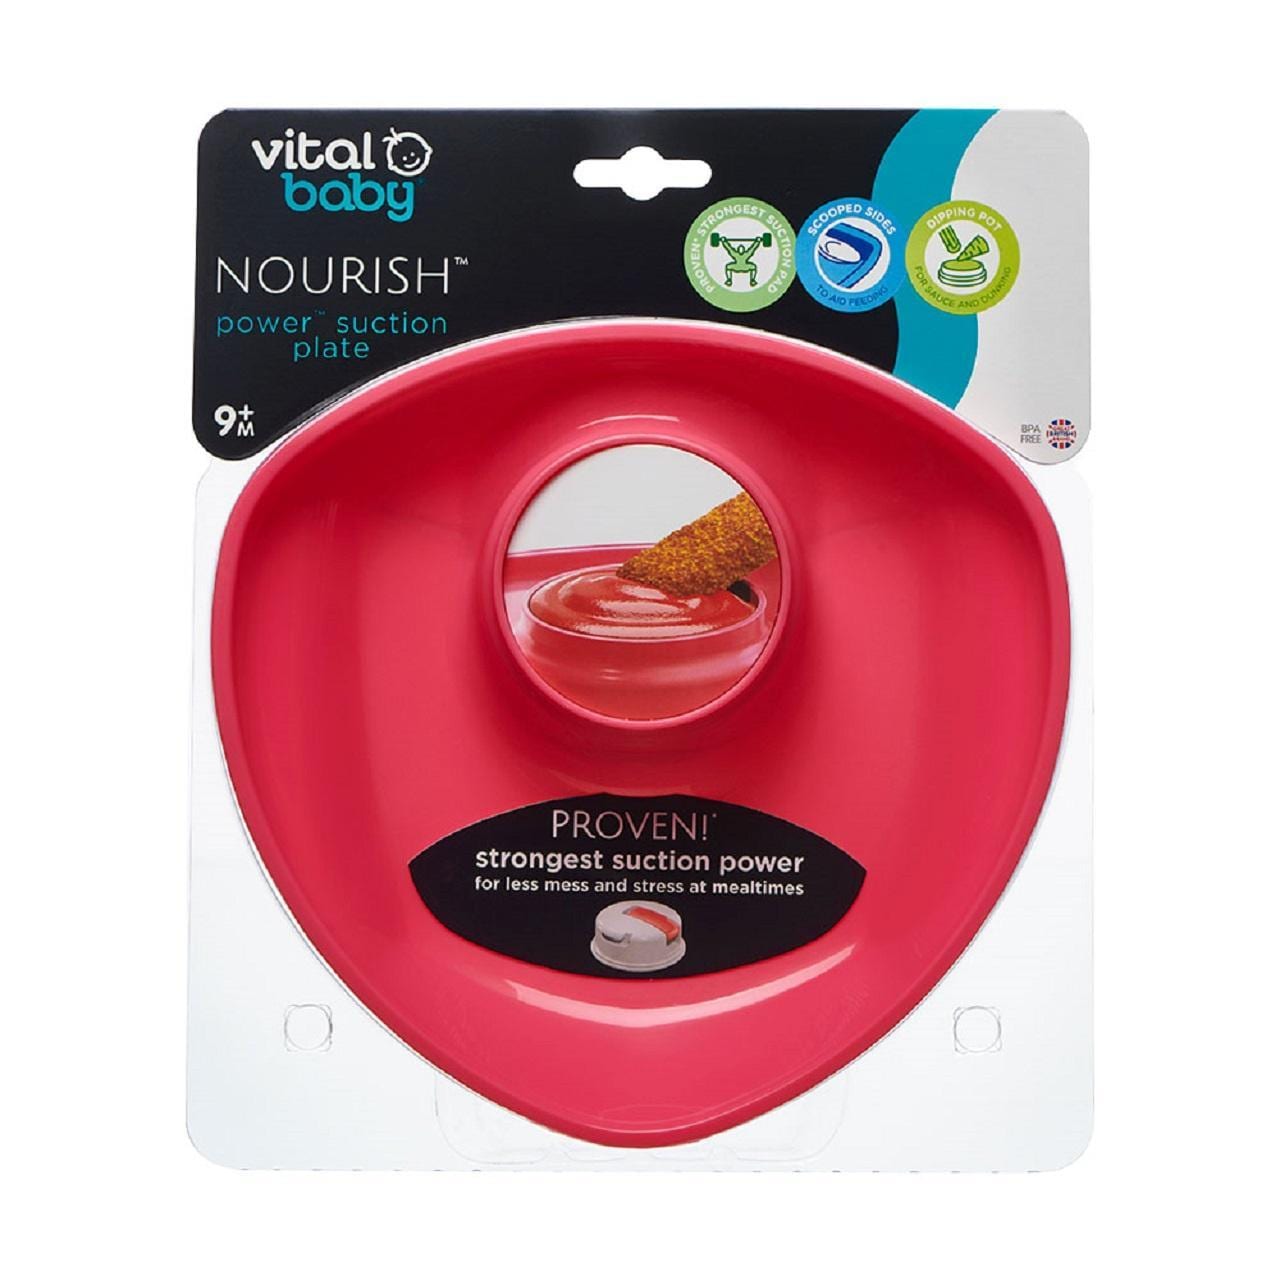 Wisecare Toddler Plates Grip Baby Plates,Food-grade Silicone Dishes,Baby Led Weaning Plates,Non-slip for Highchair Trays and Other Surface,Cherry Red,1 Pack Baby Plates with Suction 